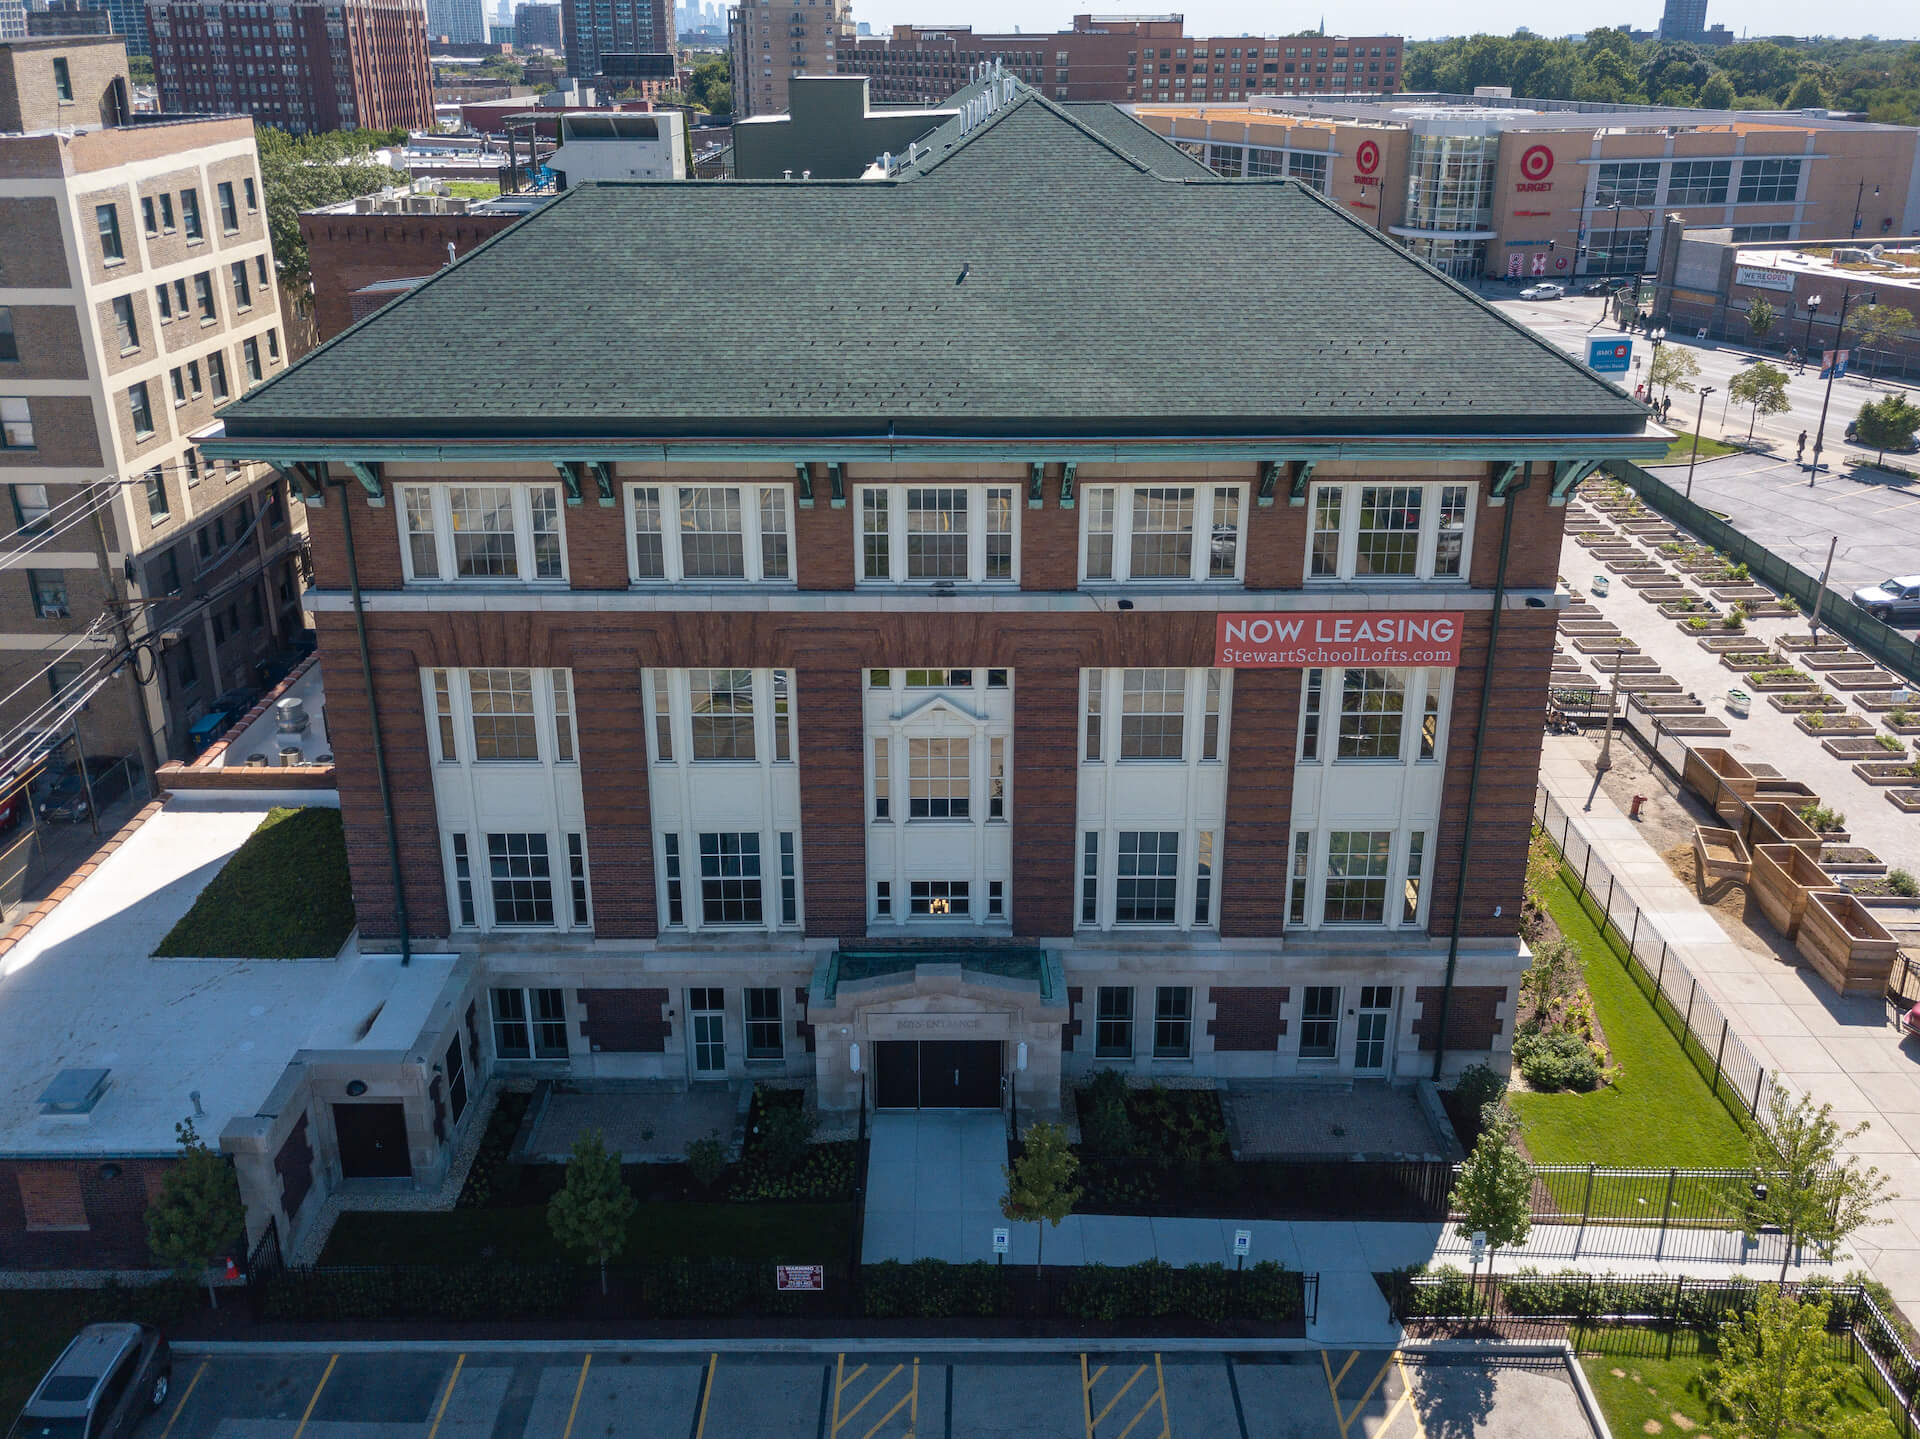 Exterior, aerial view of Stewart School Lofts building, grass courtyard, and surrounding urban area.